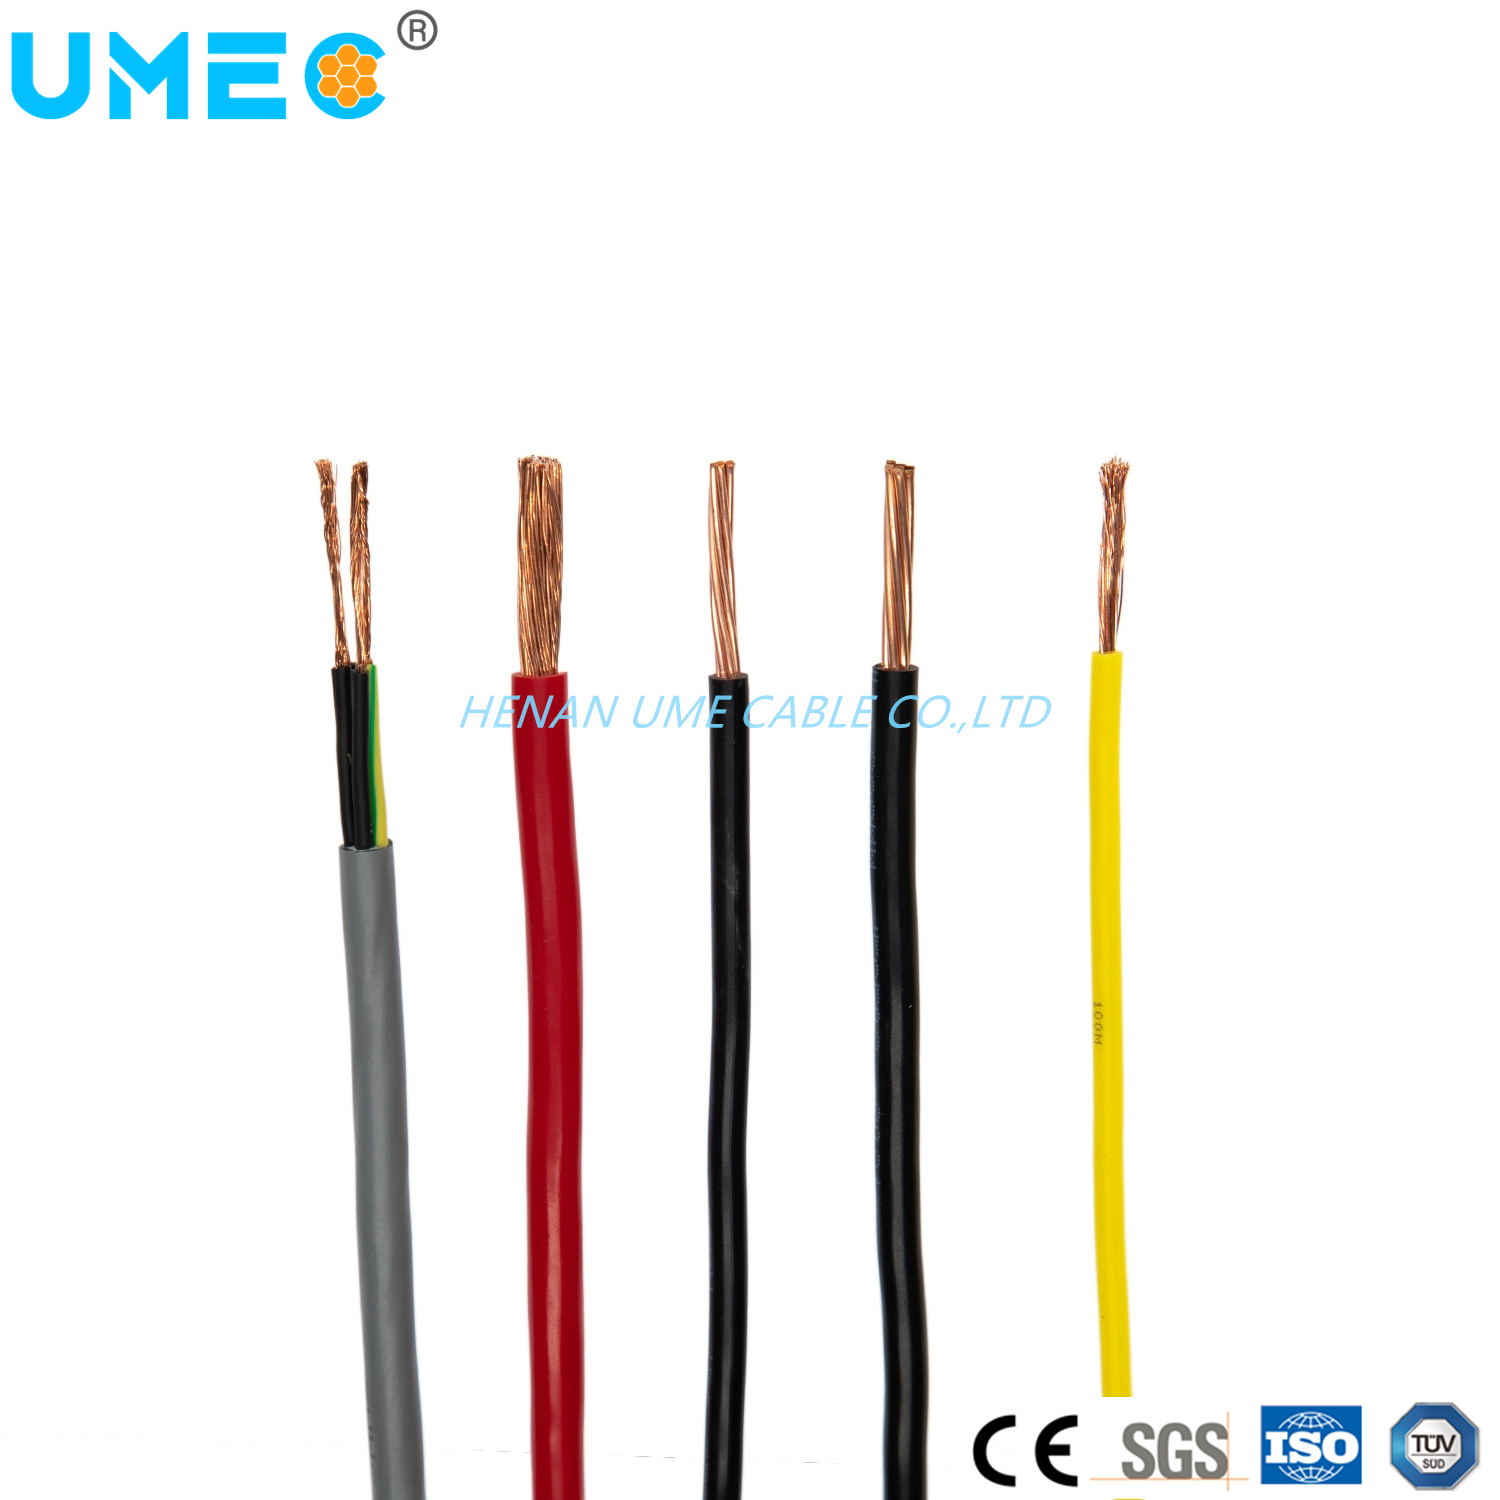 China Wire Factory Copper Conductor PVC Insulated Electrical Wire/Building Wire/House Lighting Cable Wire